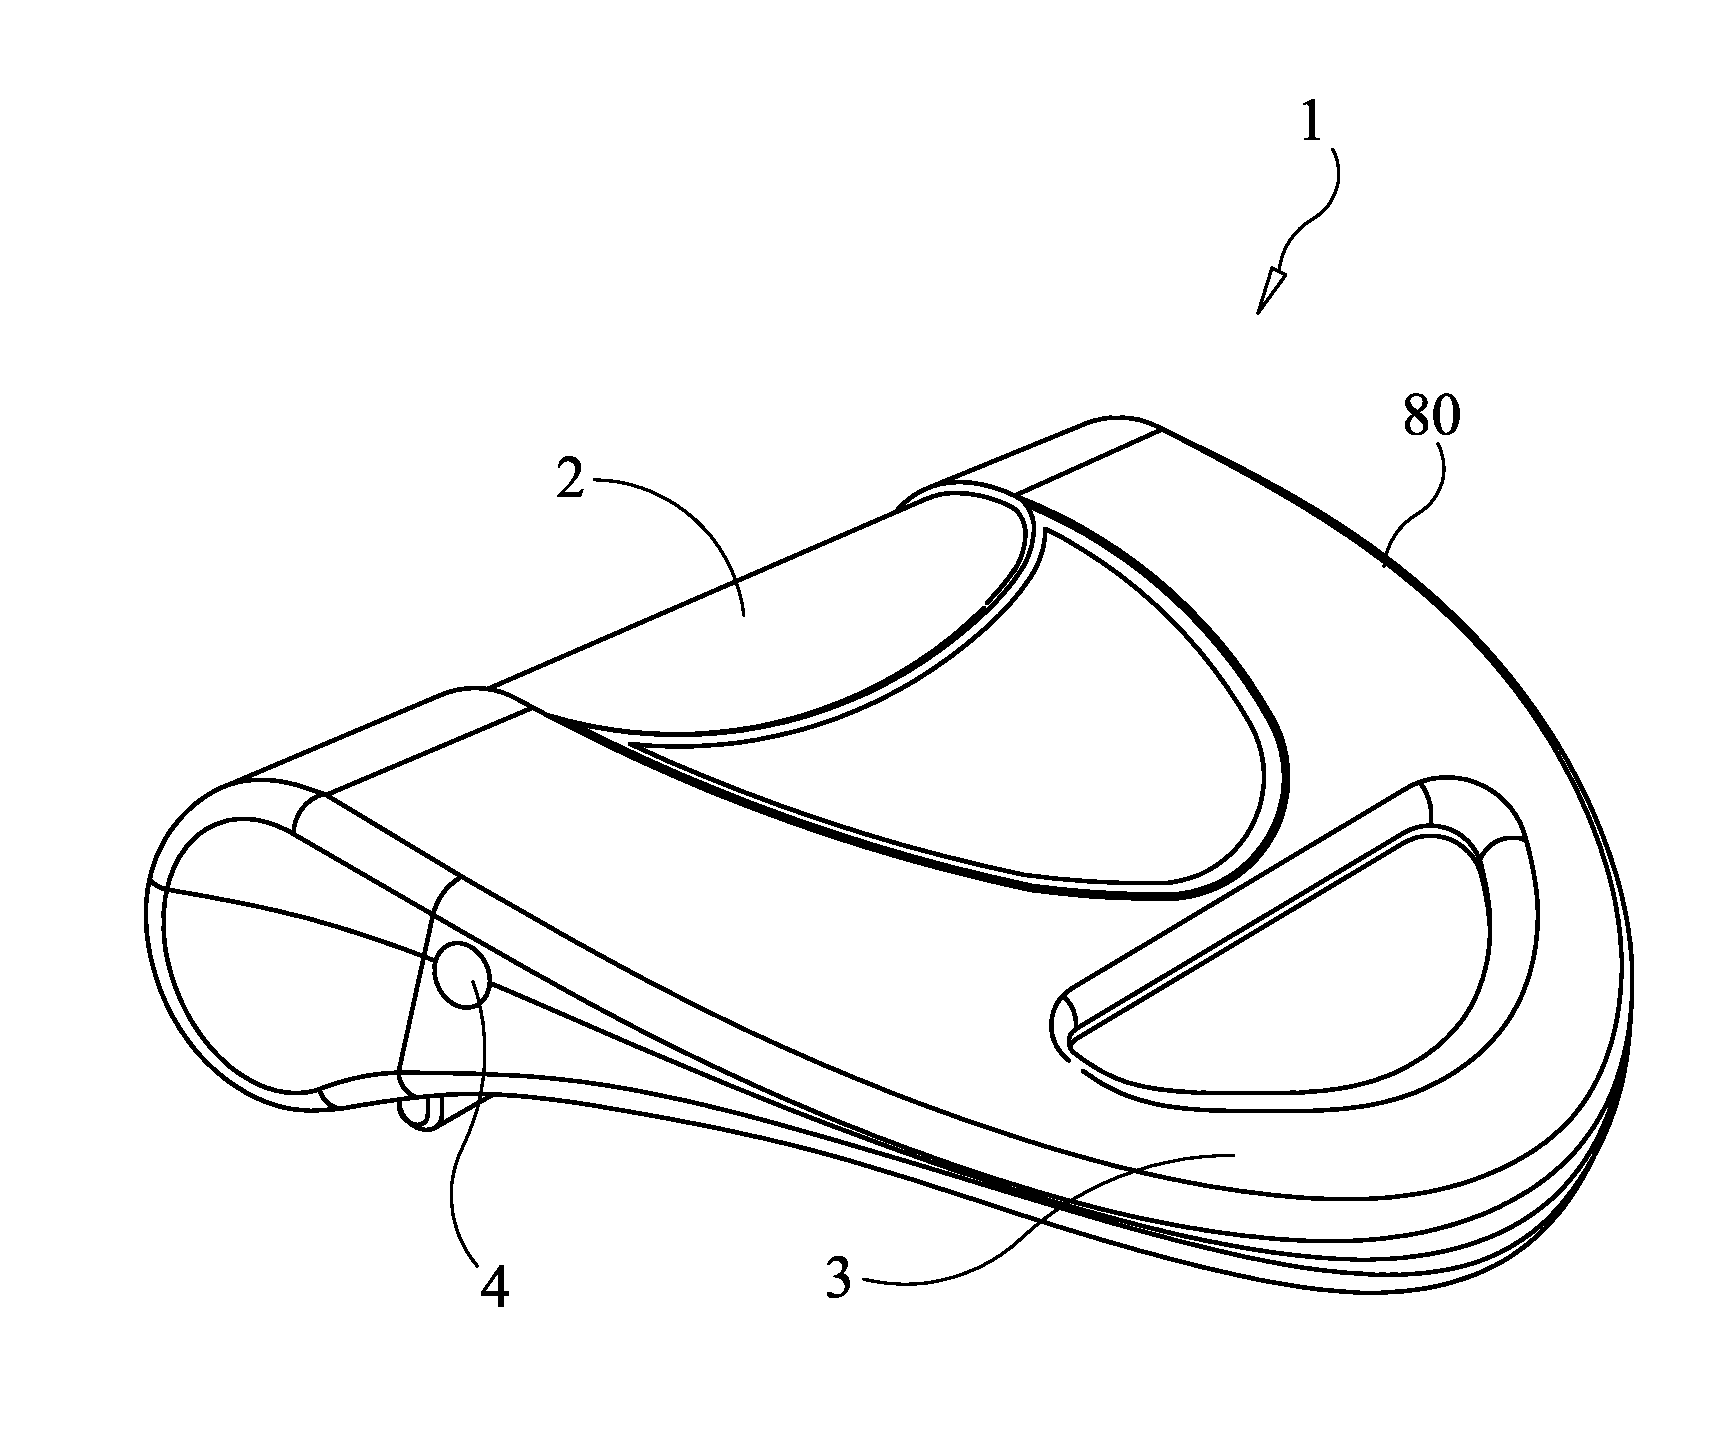 Portable Therapeutic Device Using Rotating Static Magnetic Fields